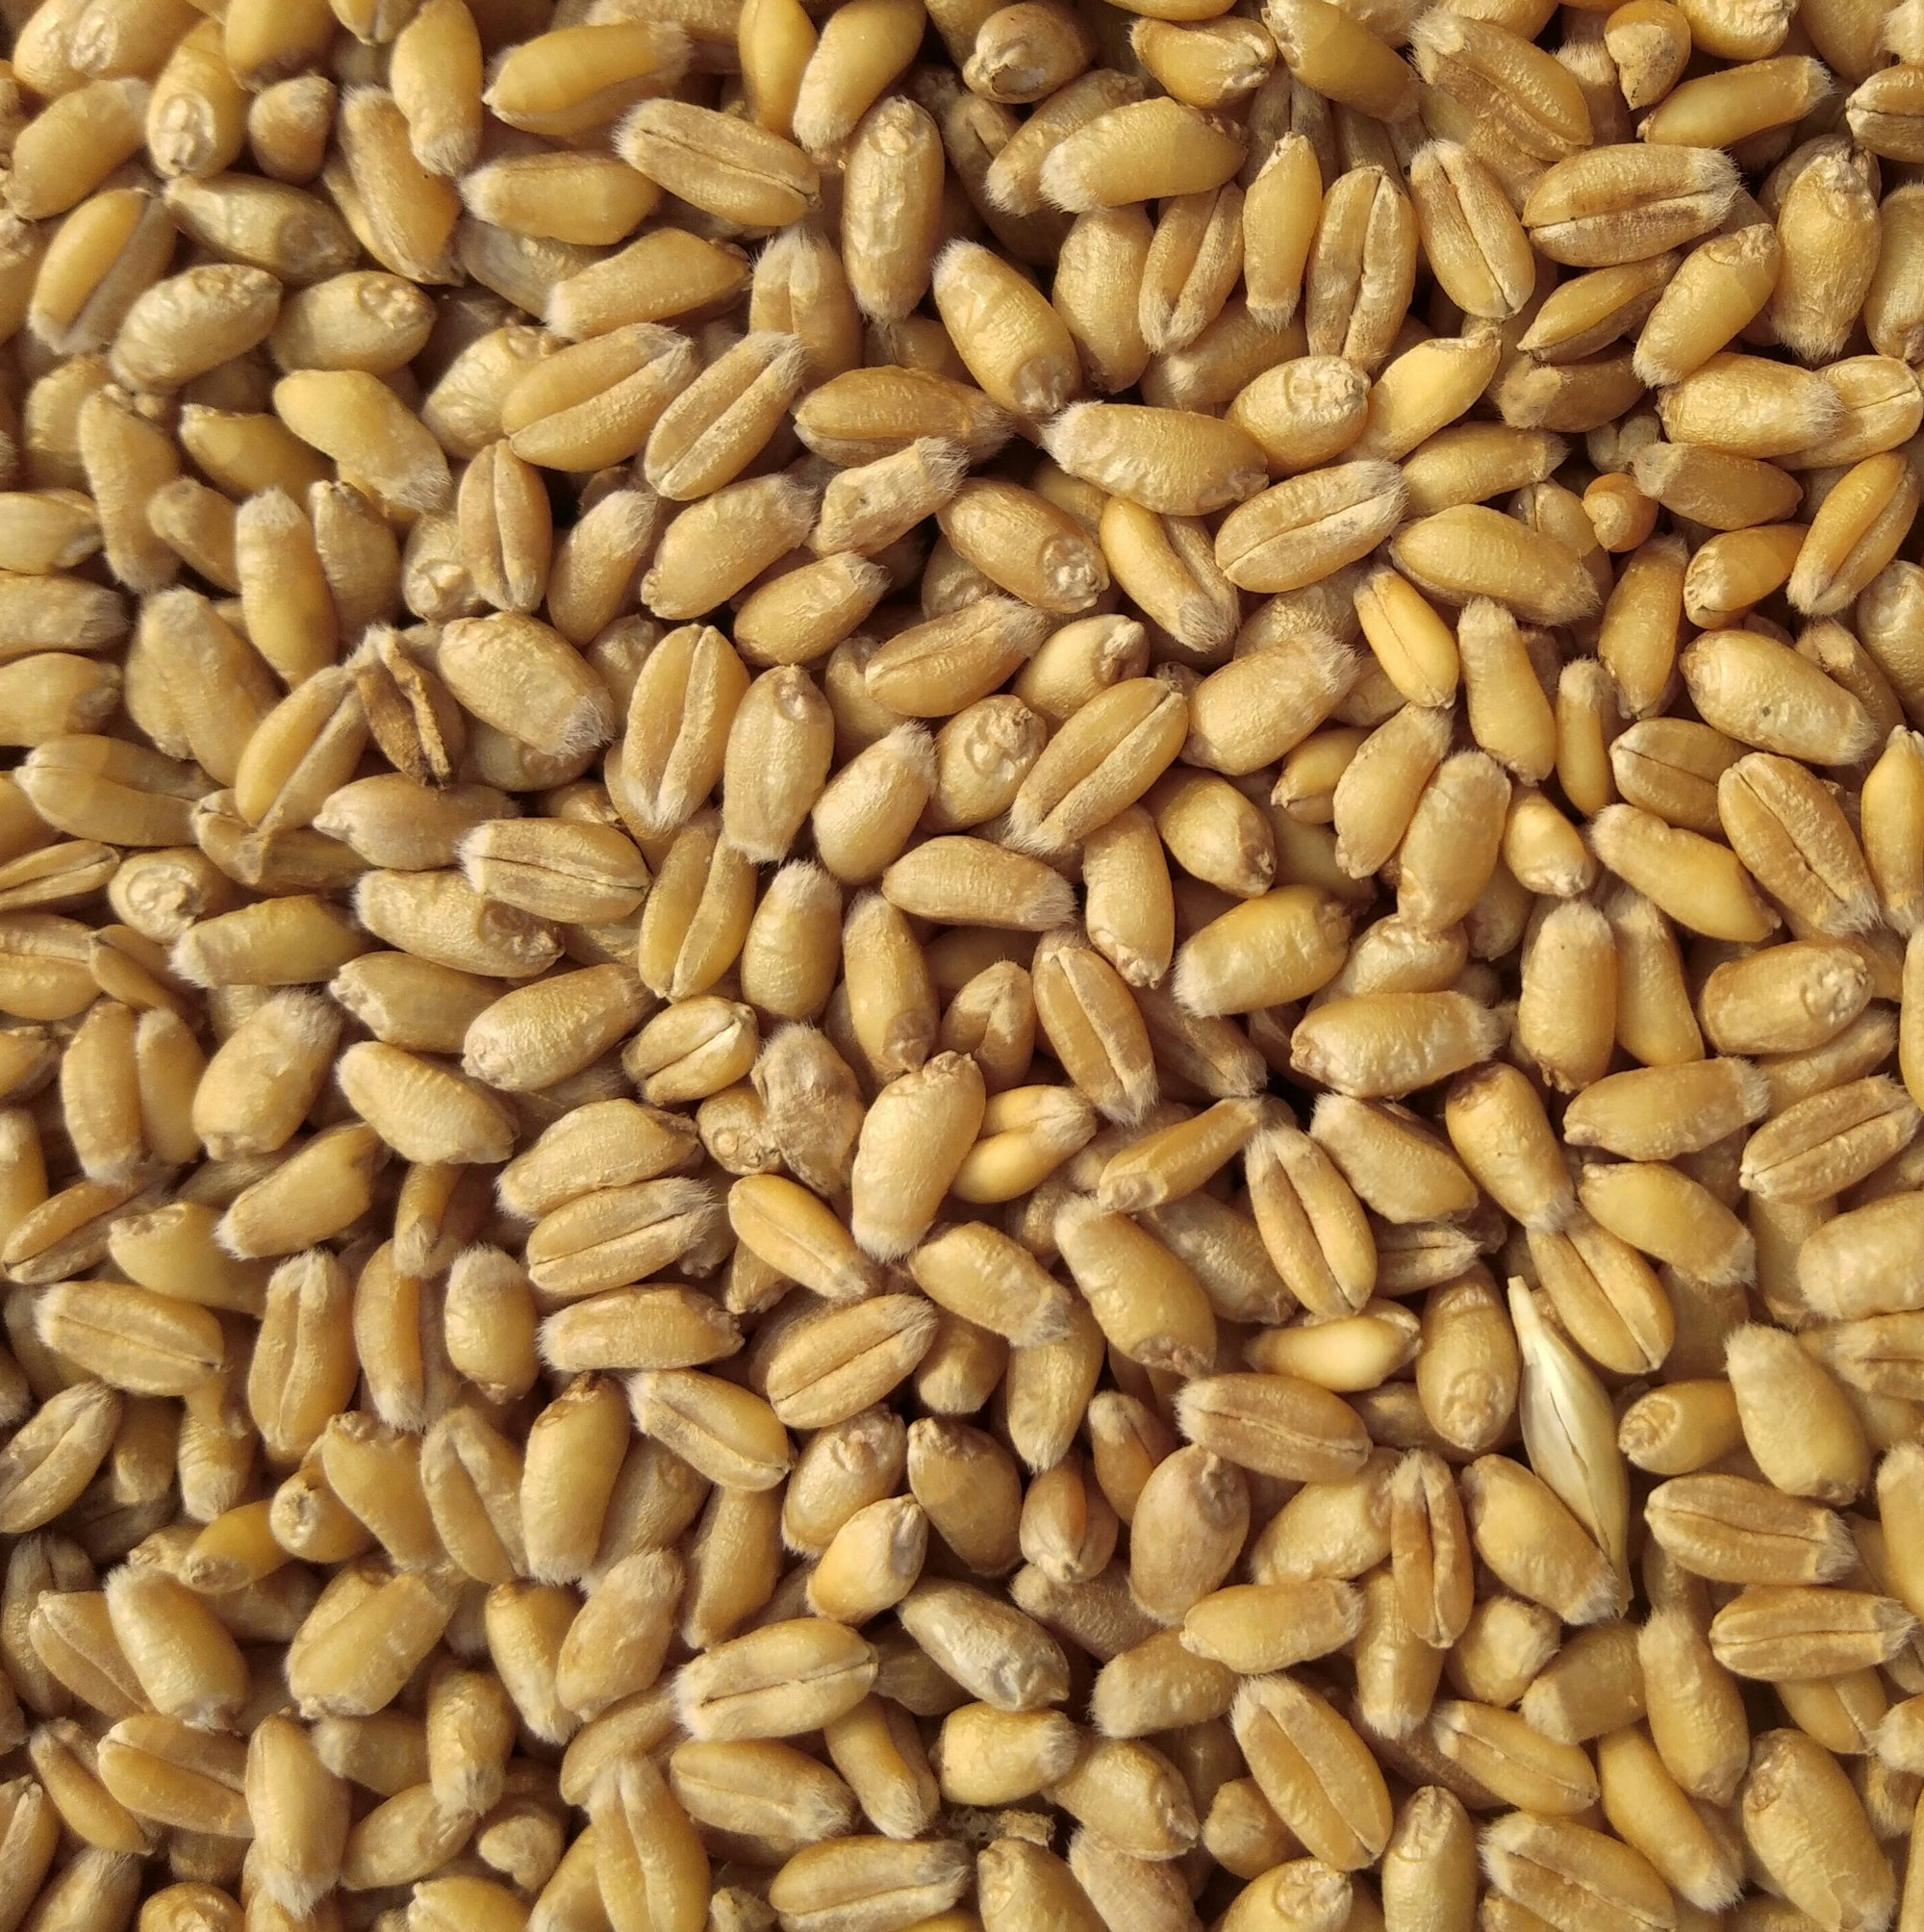 Close-up image of a large quantity of wheat grains. The grains are tightly packed together, with a mix of beige and light brown colors. The texture shows smooth, elongated grains typical of whole wheat kernels.